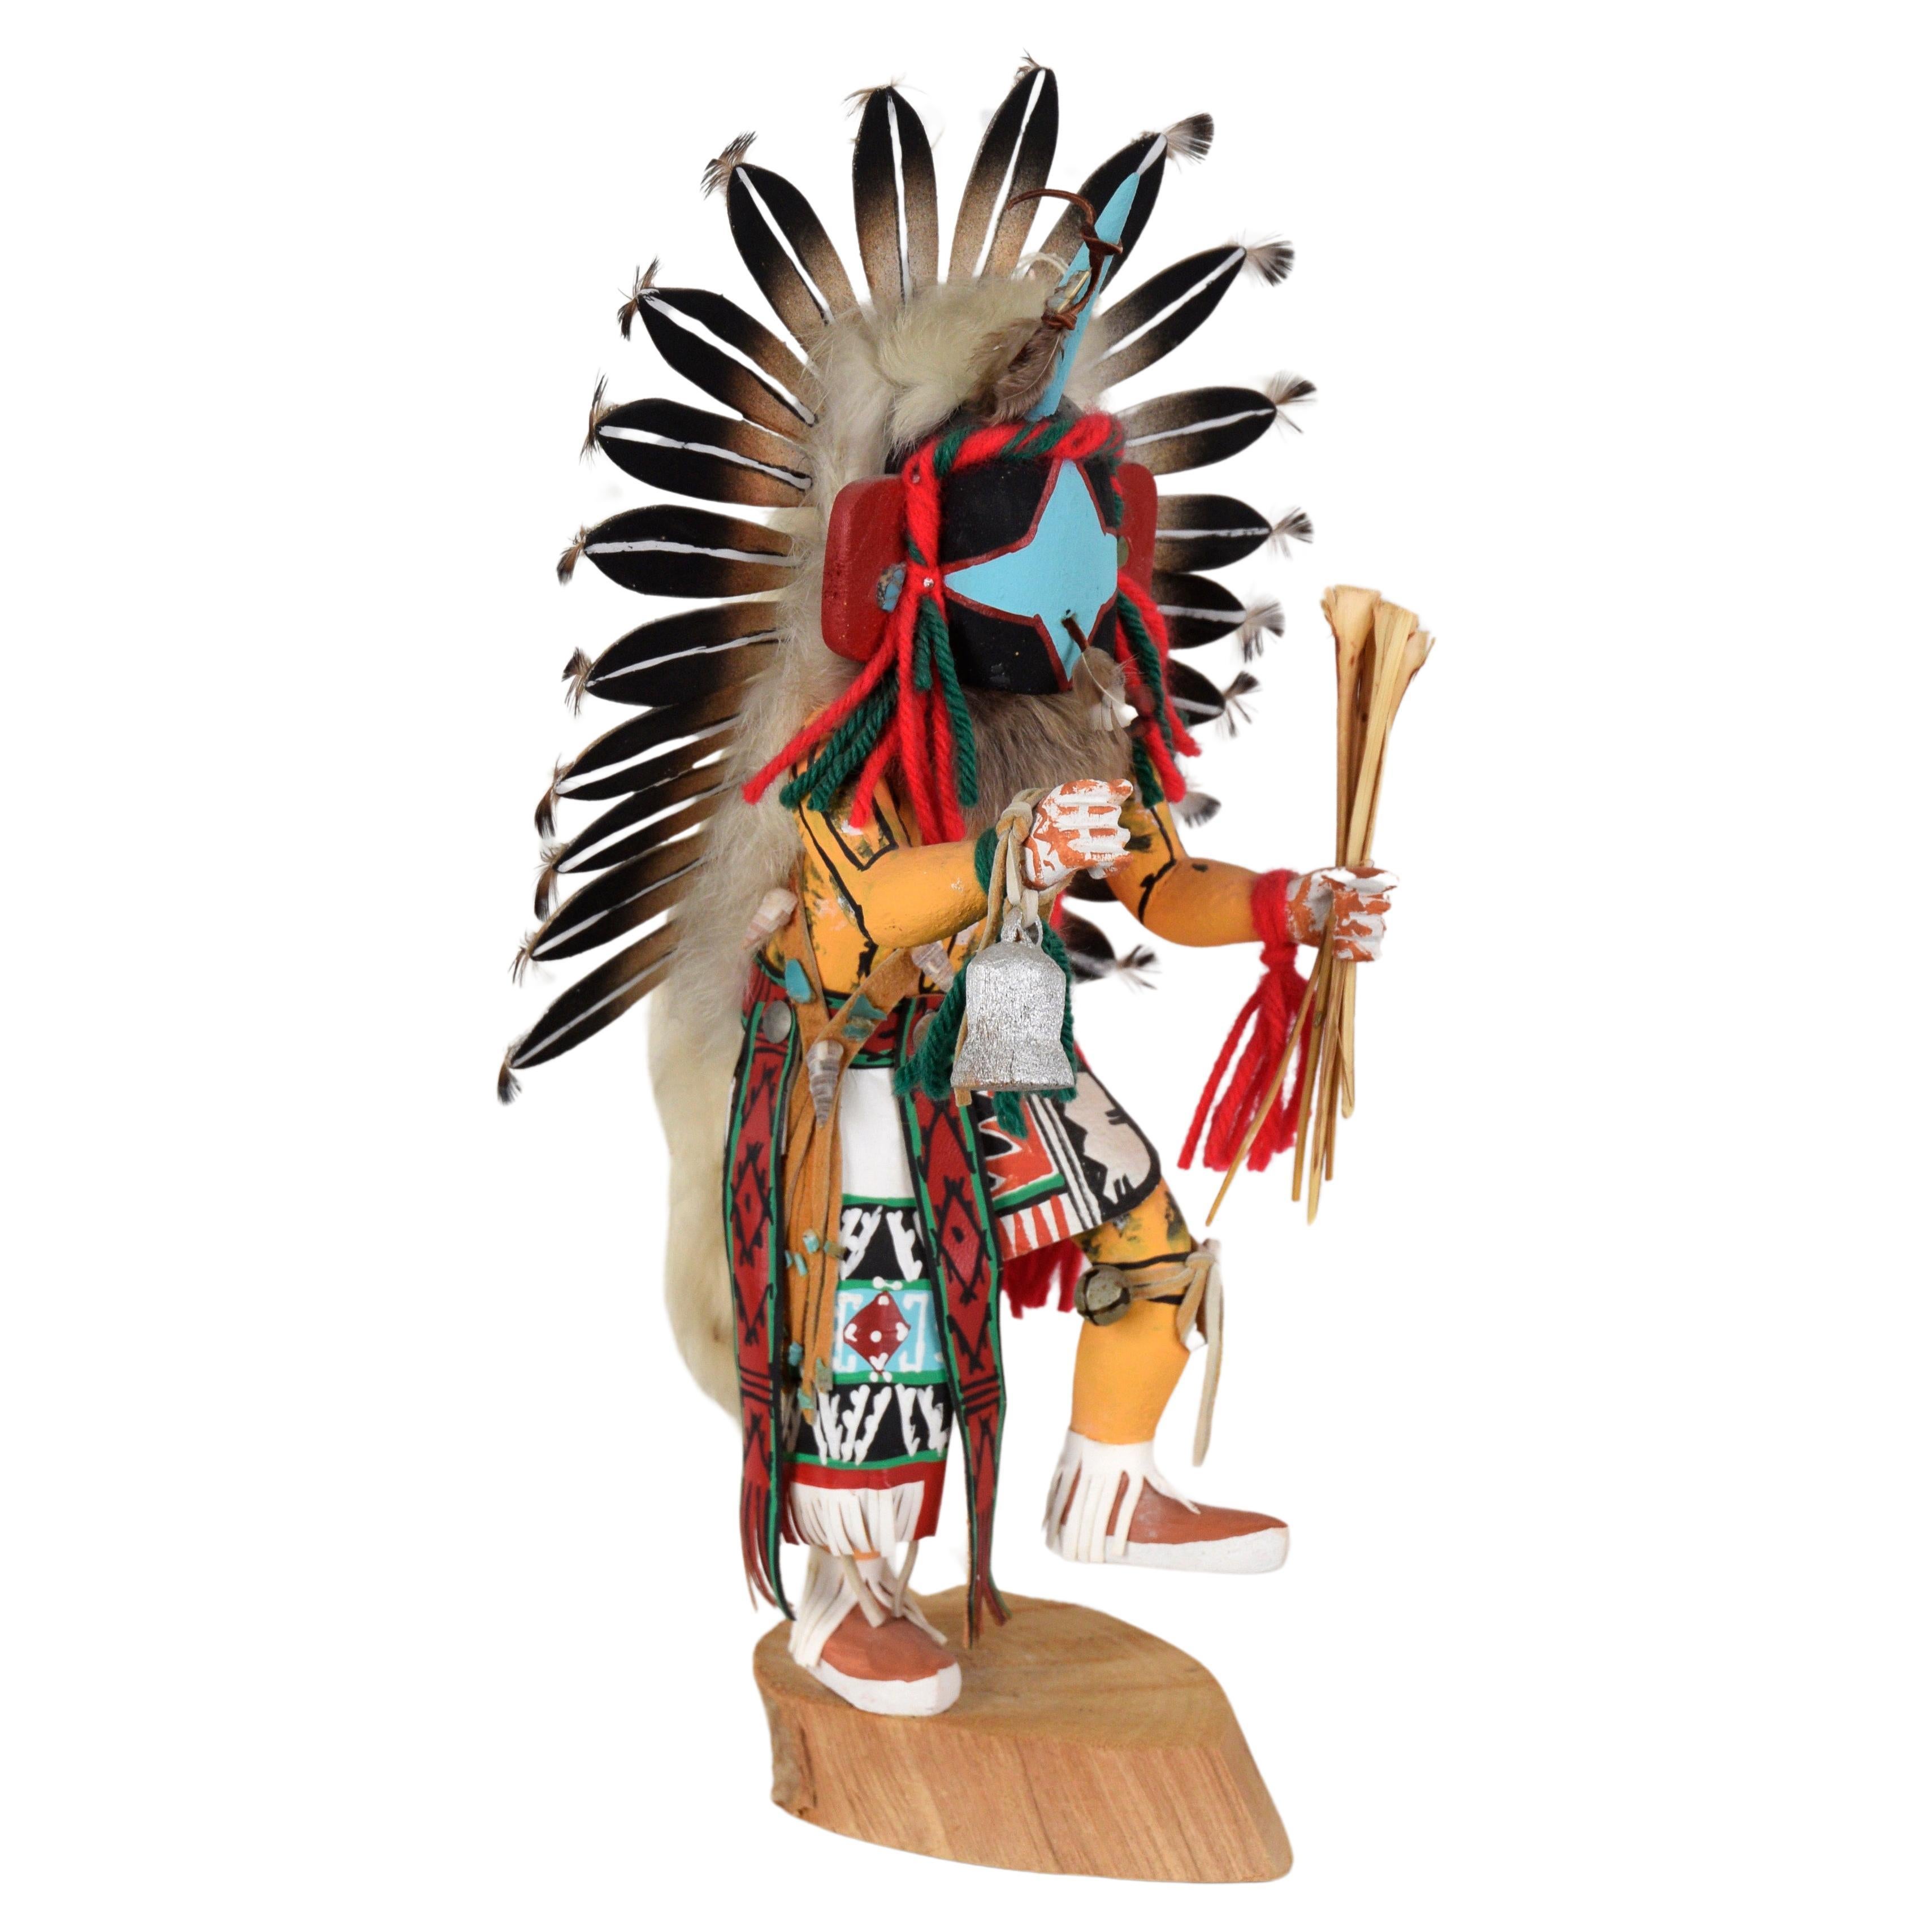 Chasing Star Performing a Dance - Kachina Doll by Rena Jean (Whitehorse) For Sale